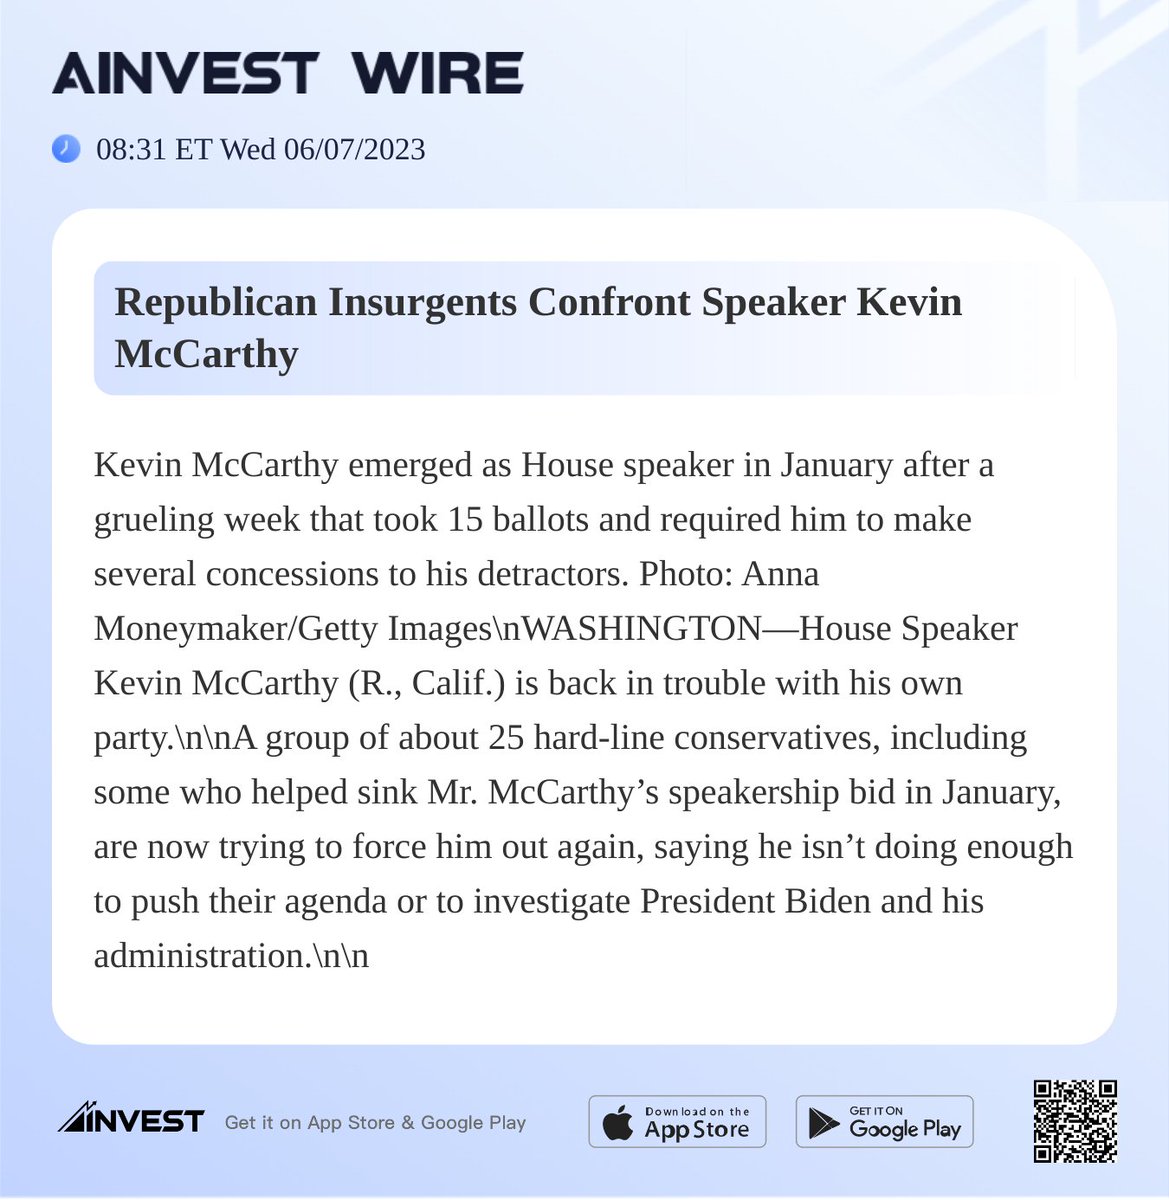 Republican Insurgents Confront Speaker Kevin McCarthy
#AInvest #Ainvest_Wire #ElectionDay #Election2022 #Midterms2022
View more: bit.ly/3X4l0XC